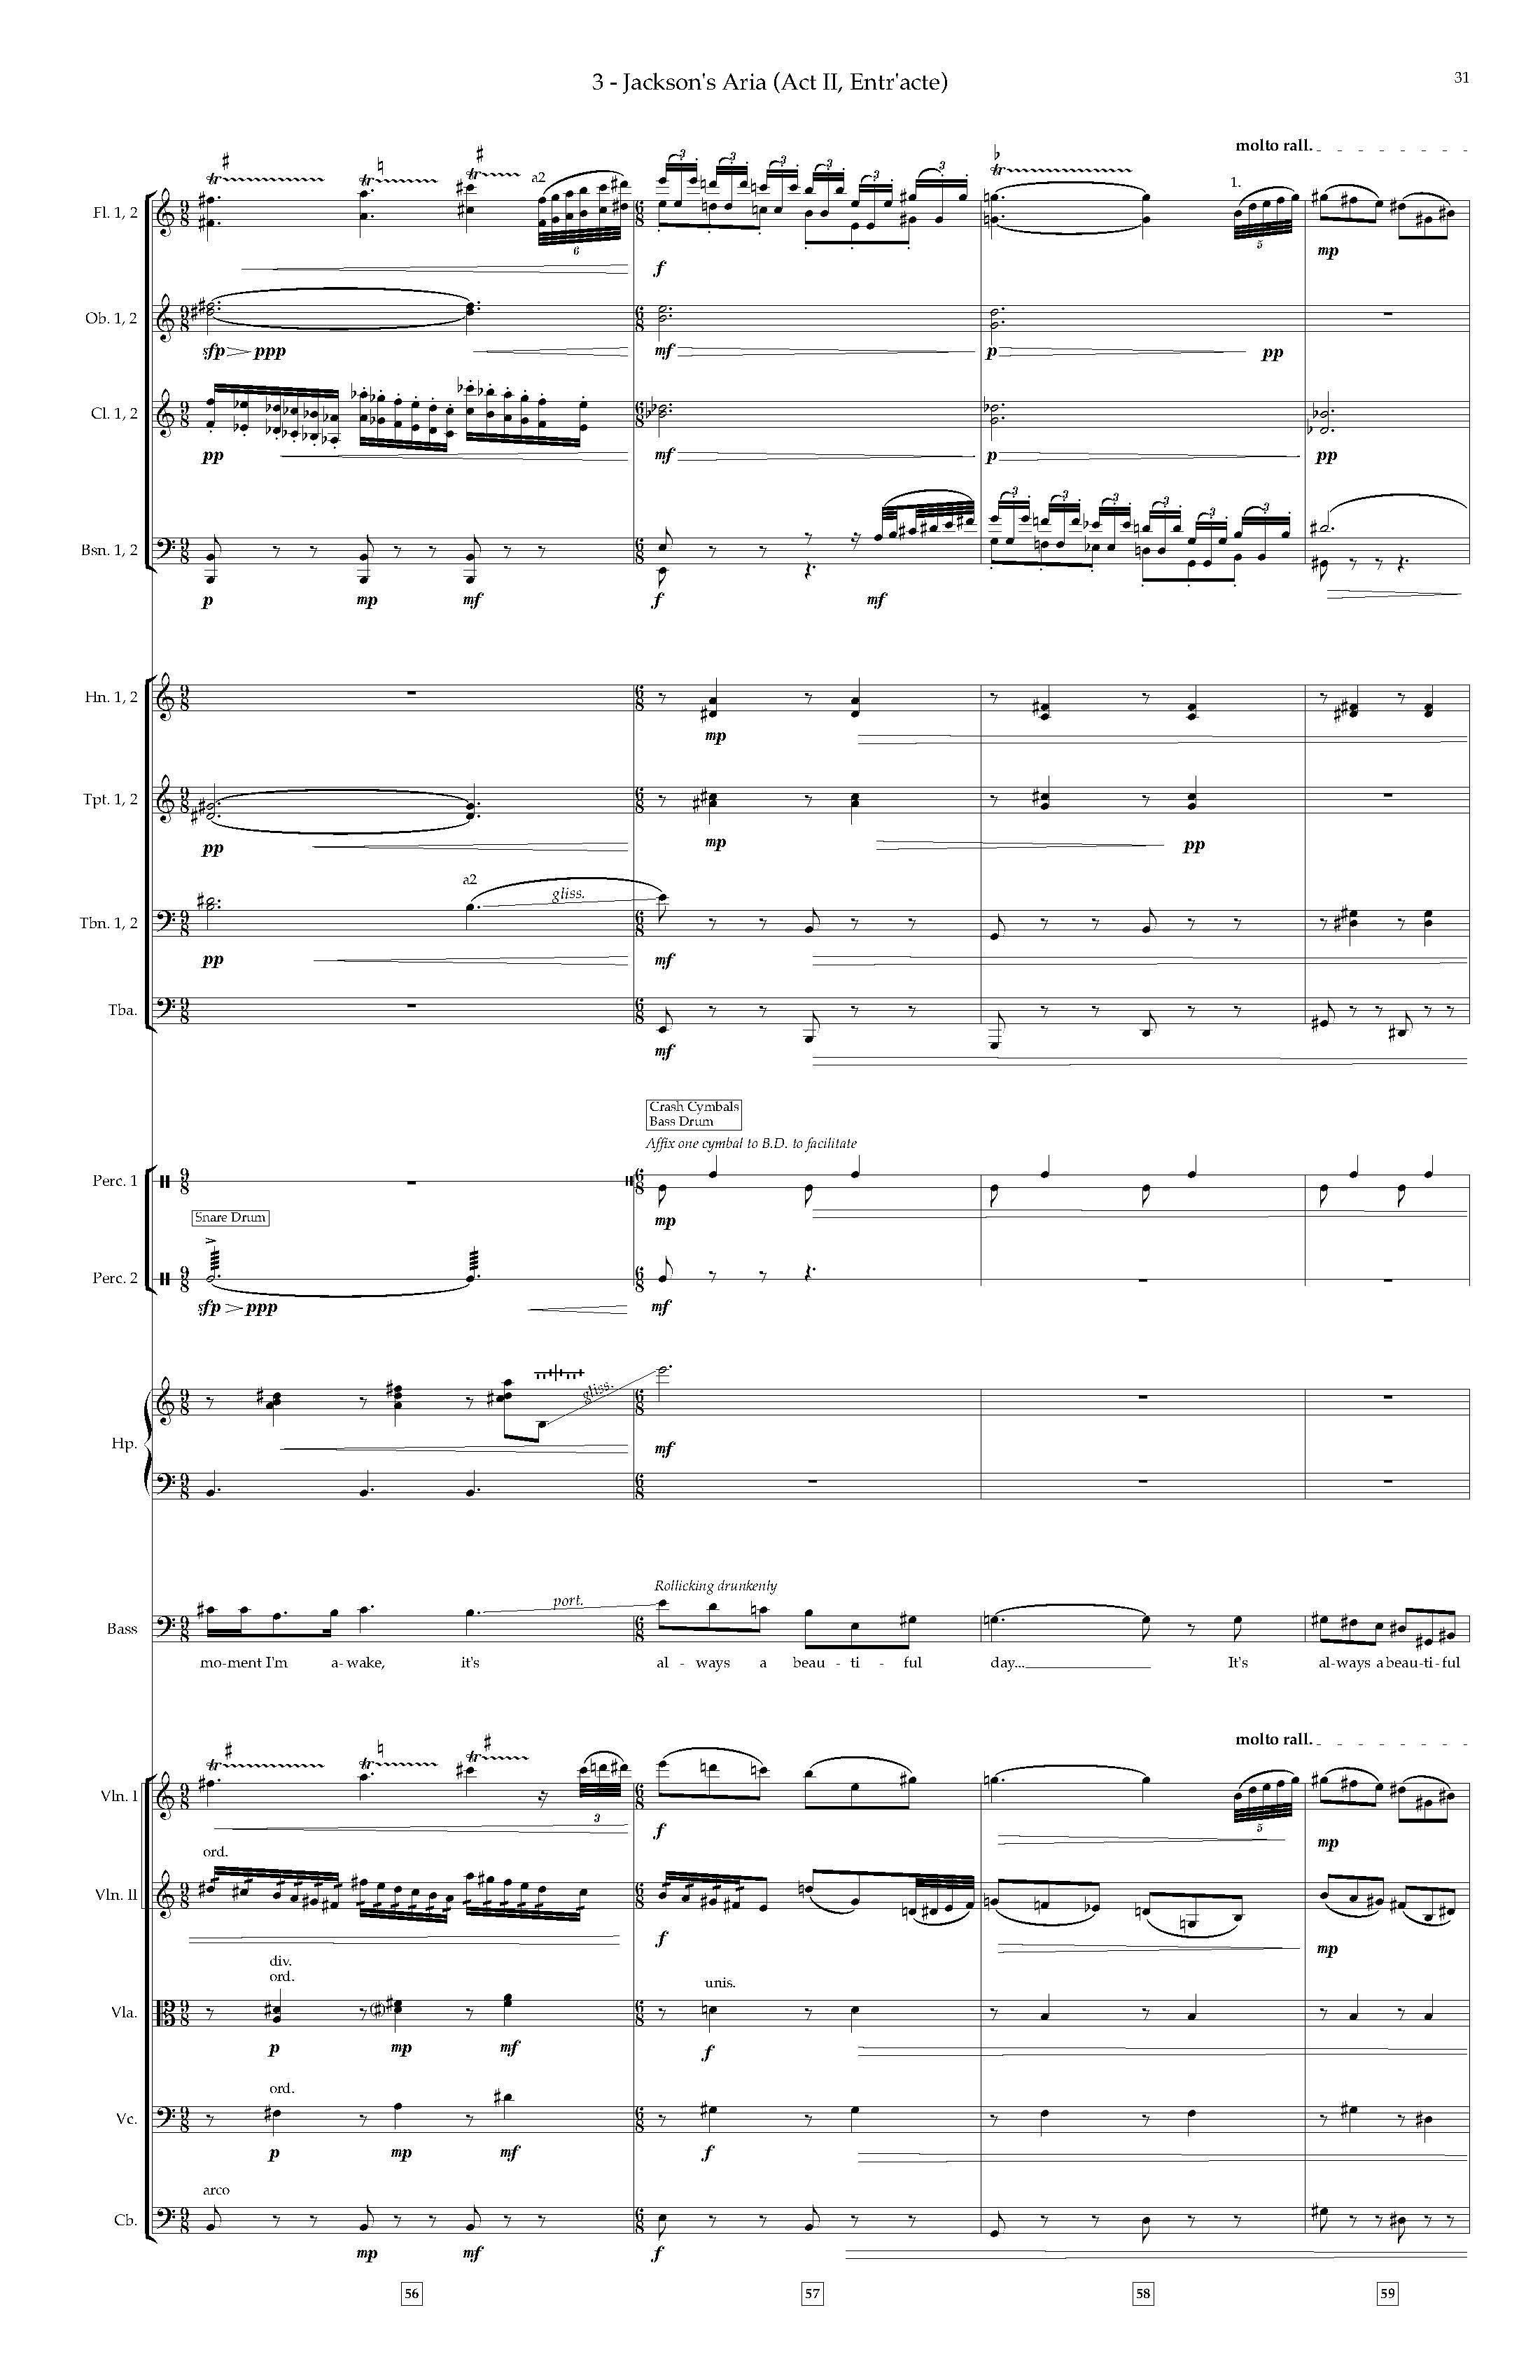 Arias and Interludes from HWGS - Complete Score_Page_37.jpg